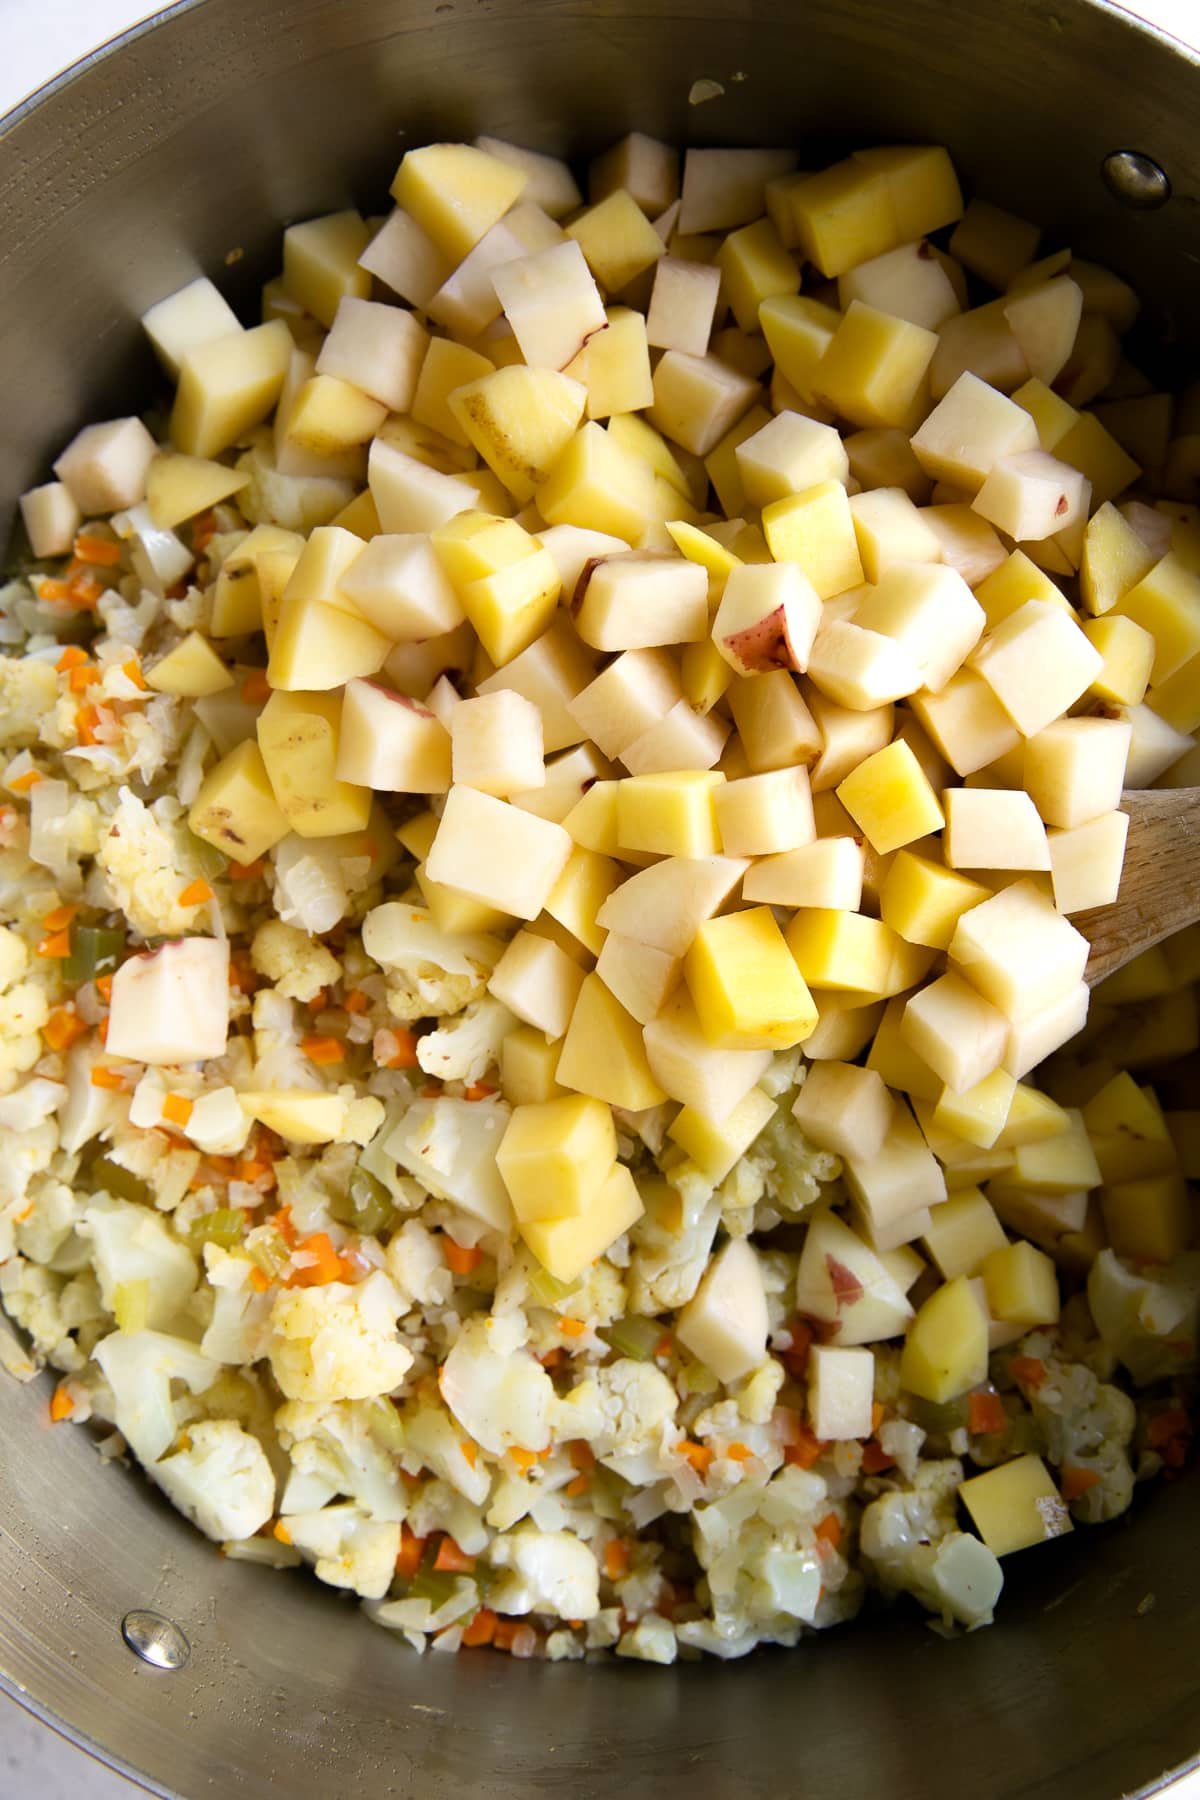 Finely minced onion, celery, and carrots, cooking in a large pot with finely chopped cauliflower and diced potatoes.